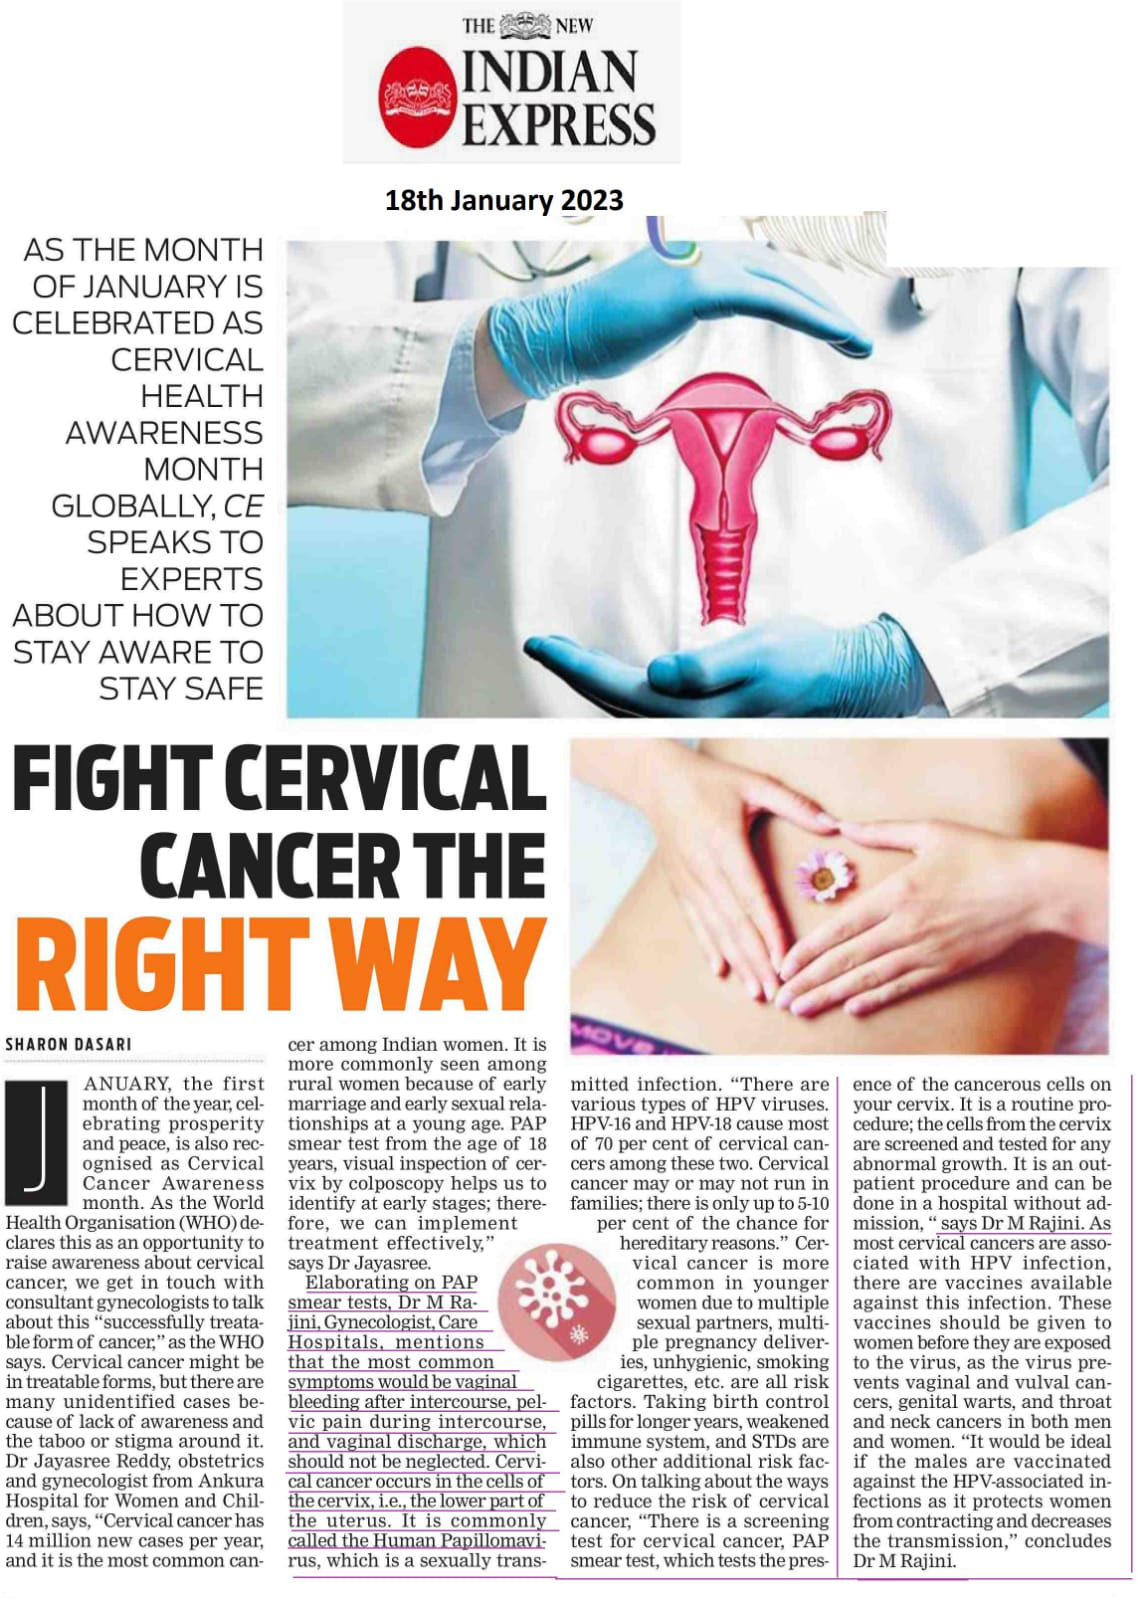 Fight Cervical Cancer The Right Way